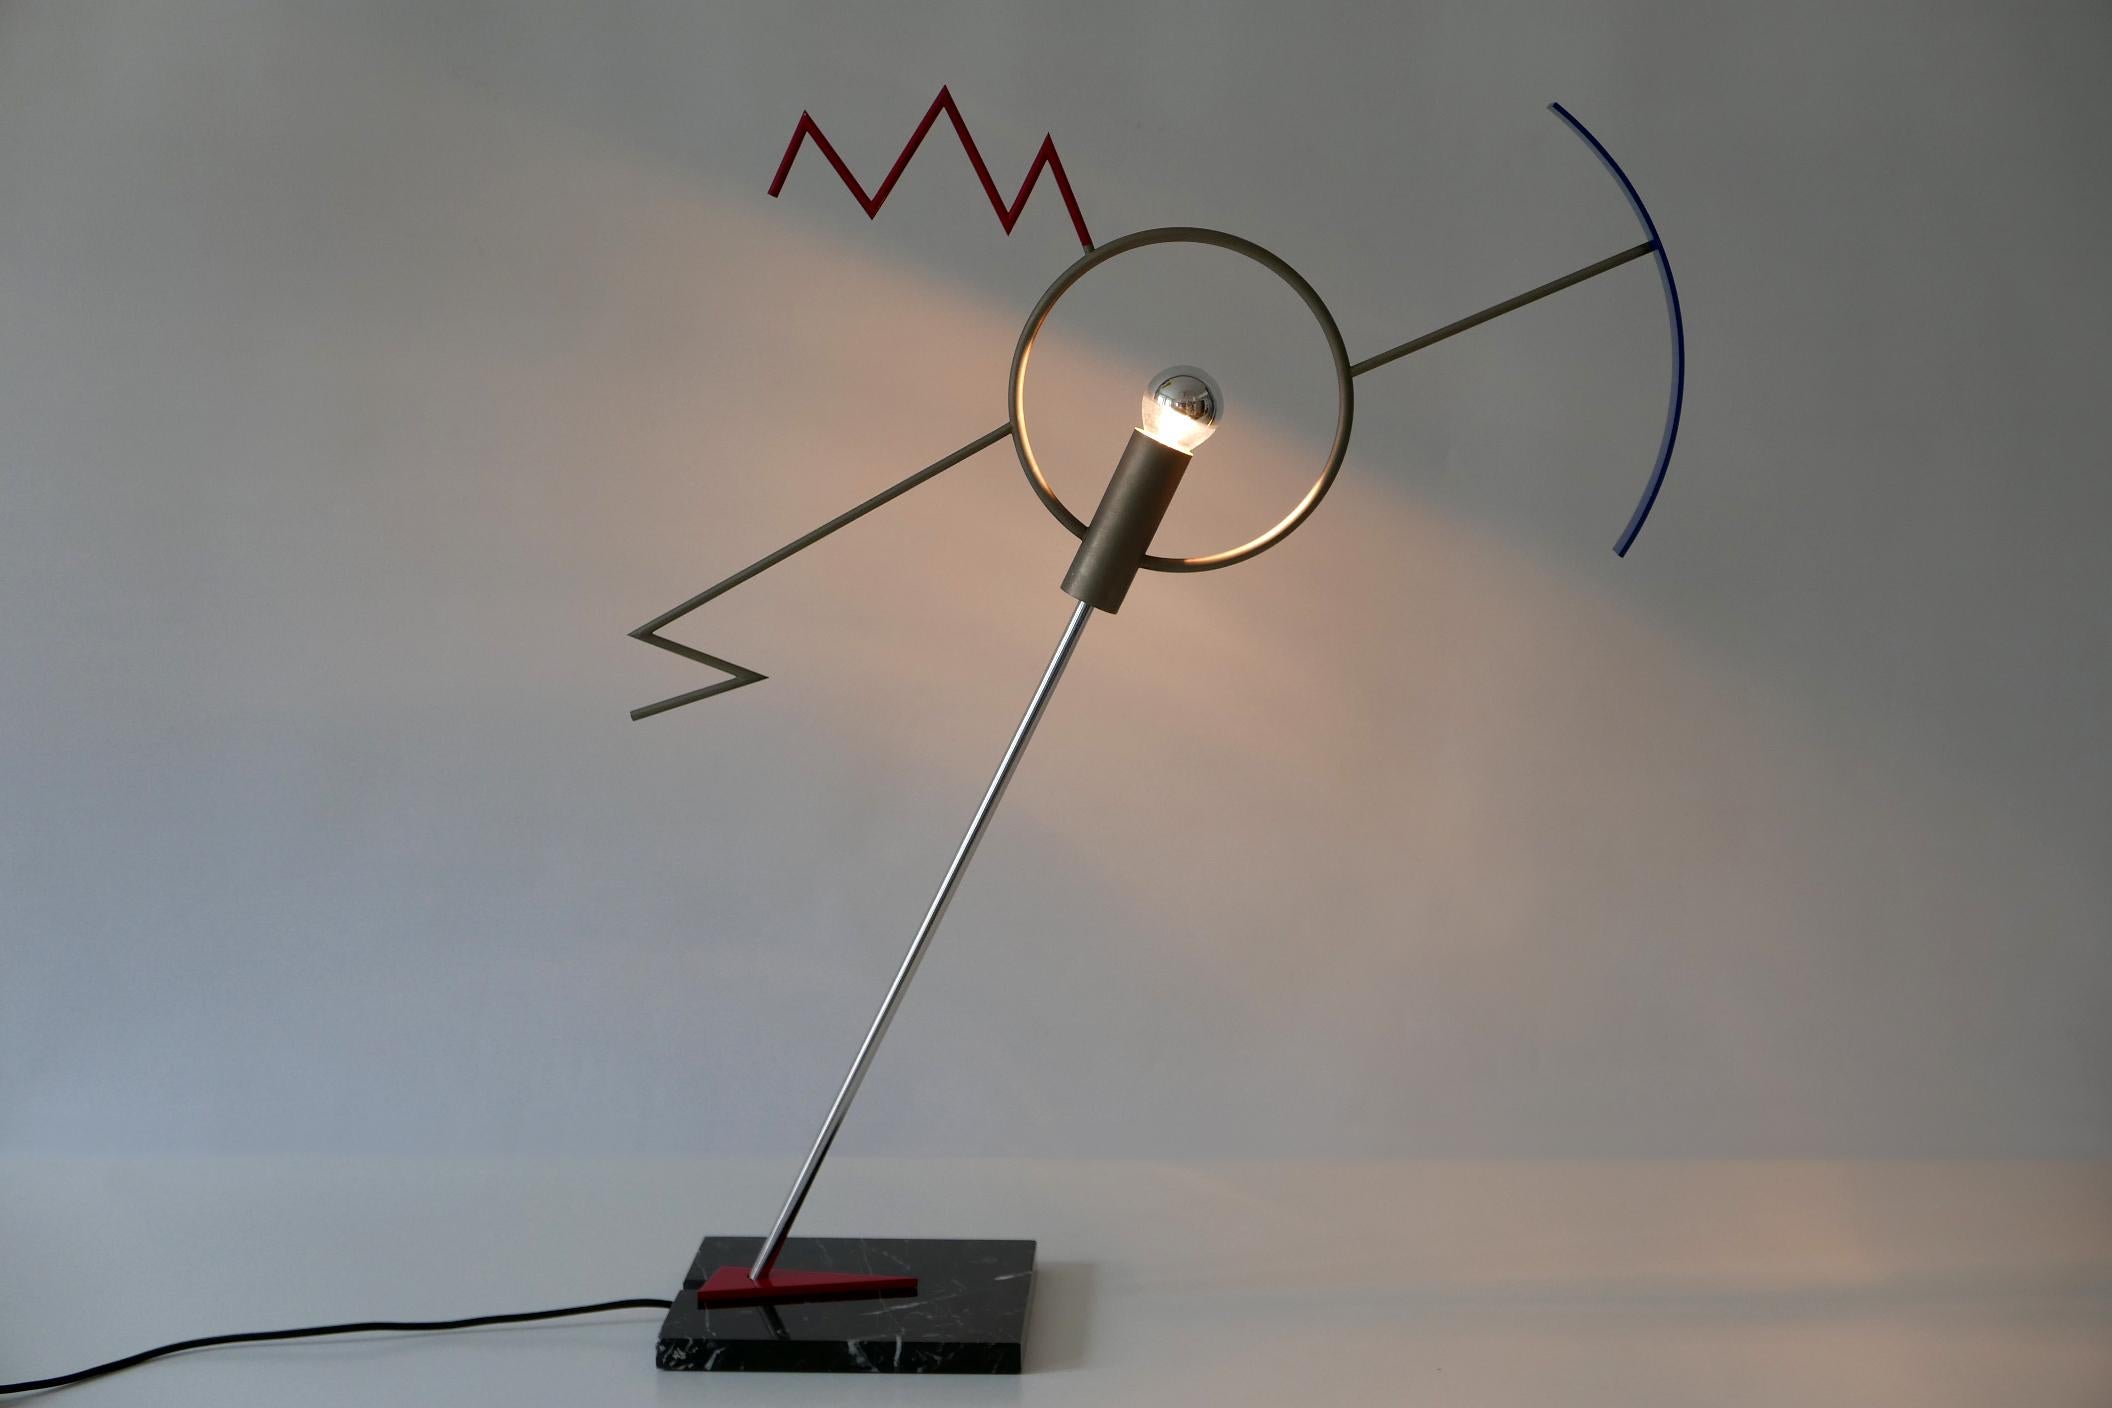 Extremely rare, sculptural table lamp or light object in Memphis Design. Model Valencia. Designed by Javier Mariscal for BD Ediciones De Diseño Editions, 1980s, Spain.

Executed in black marble, sheet metal; red and black enameled, tubular steel;